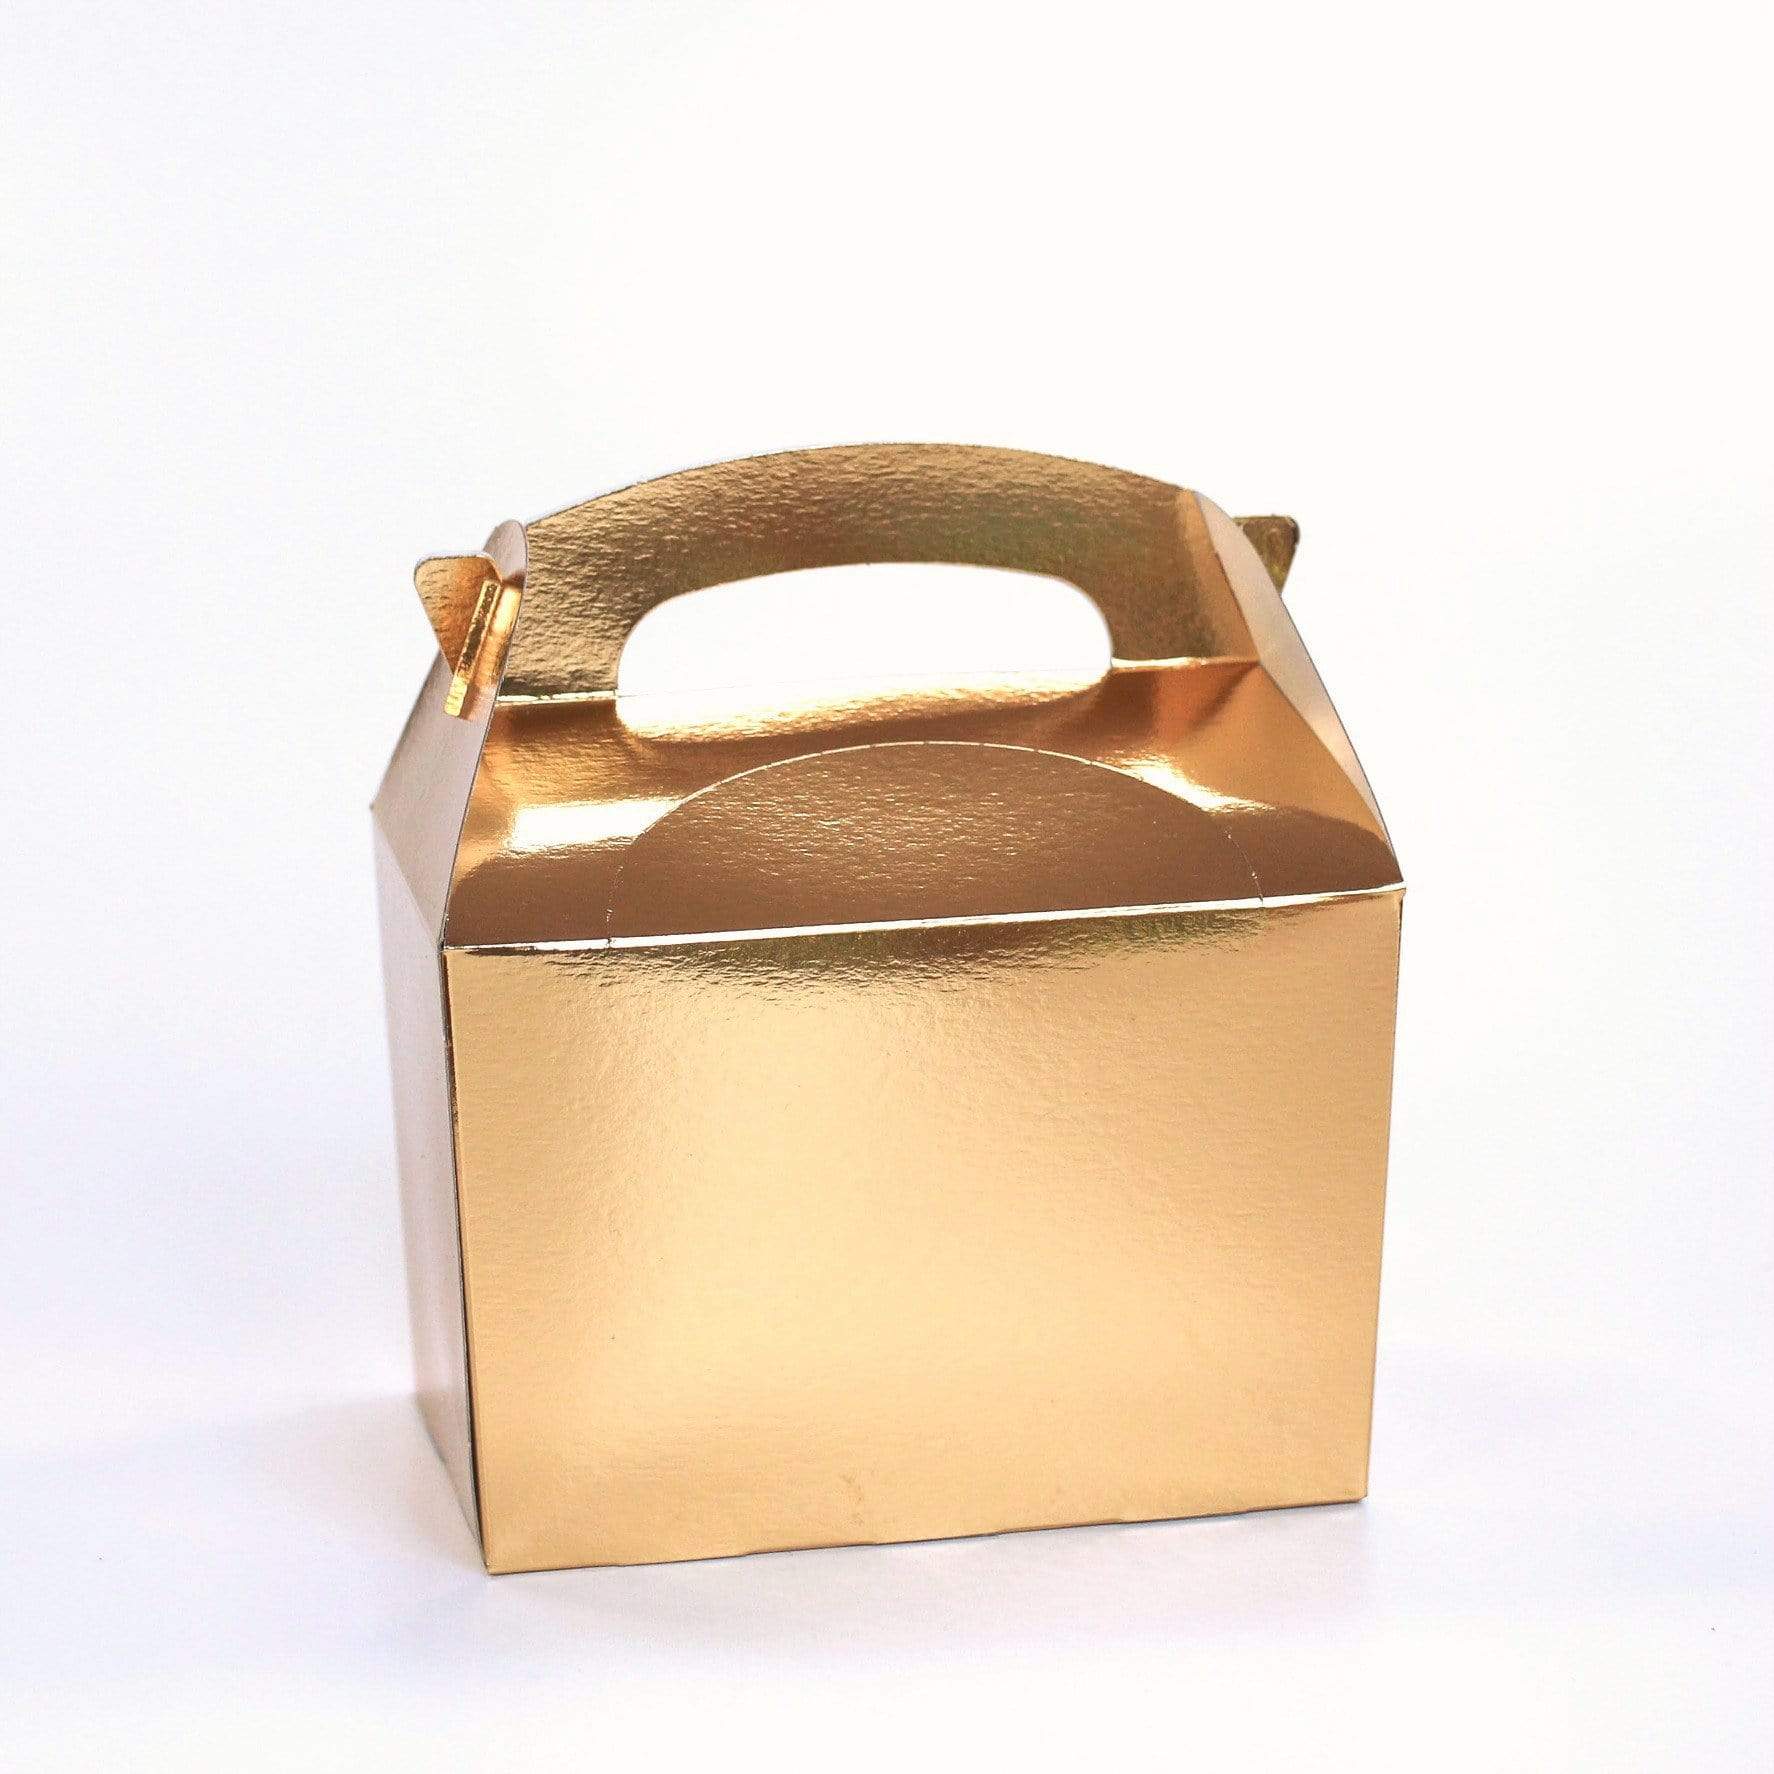 Gold Party Lunch Boxes | Party Boxes & Party Food Ideas Online UK Oaktree UK